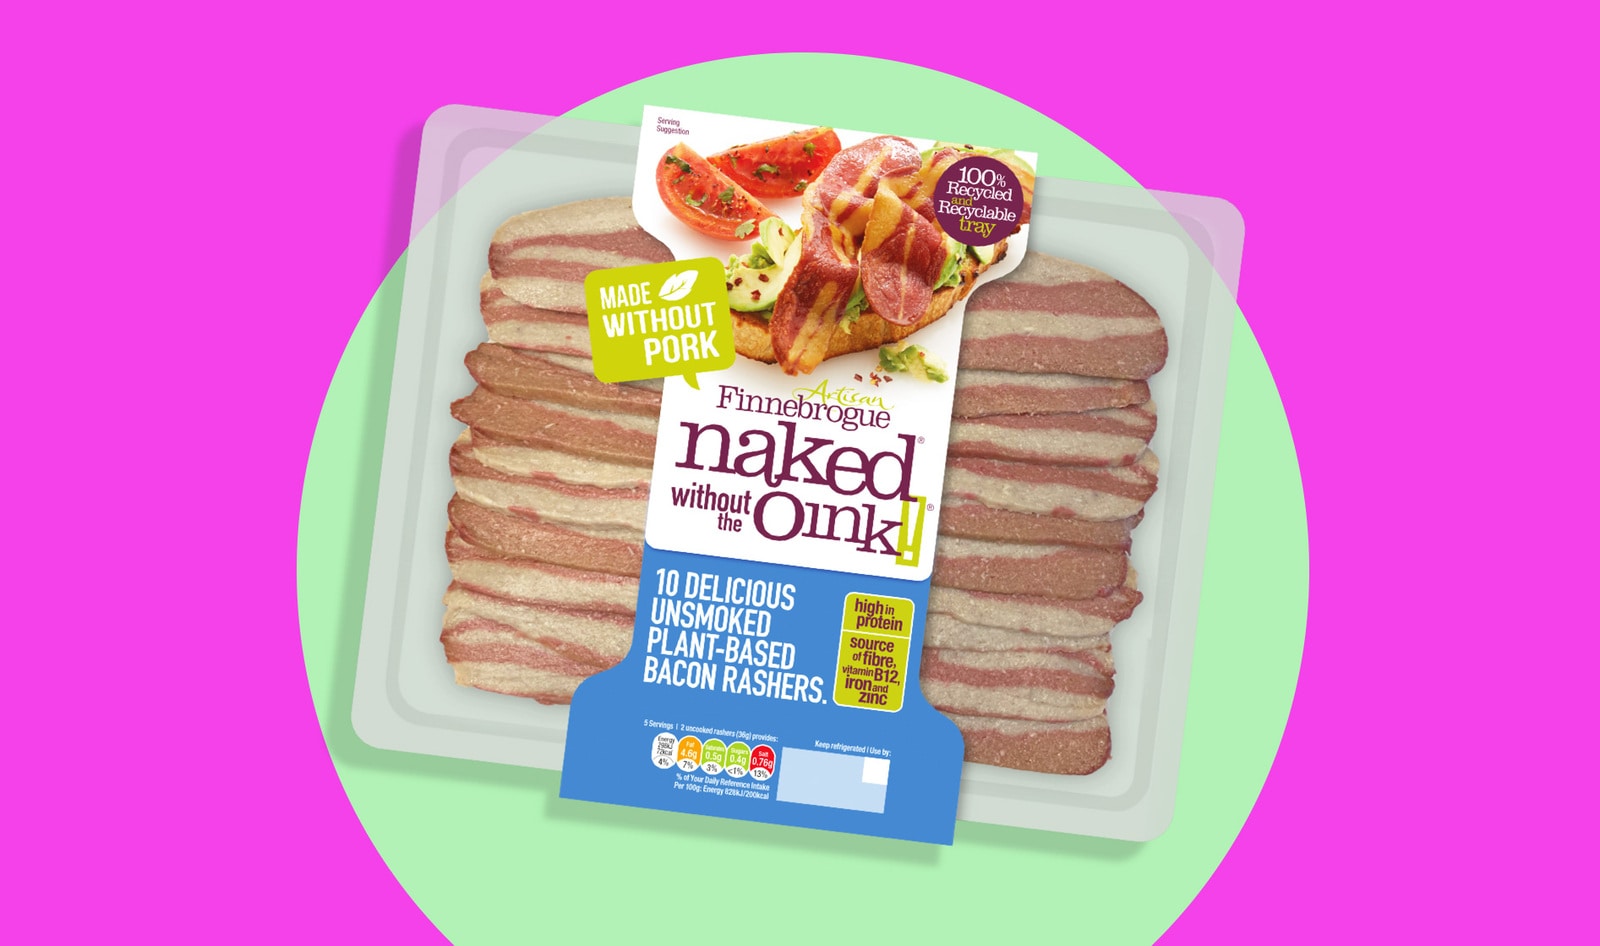 Ireland’s Leading Sausage Company Is Now Making Vegan Bacon